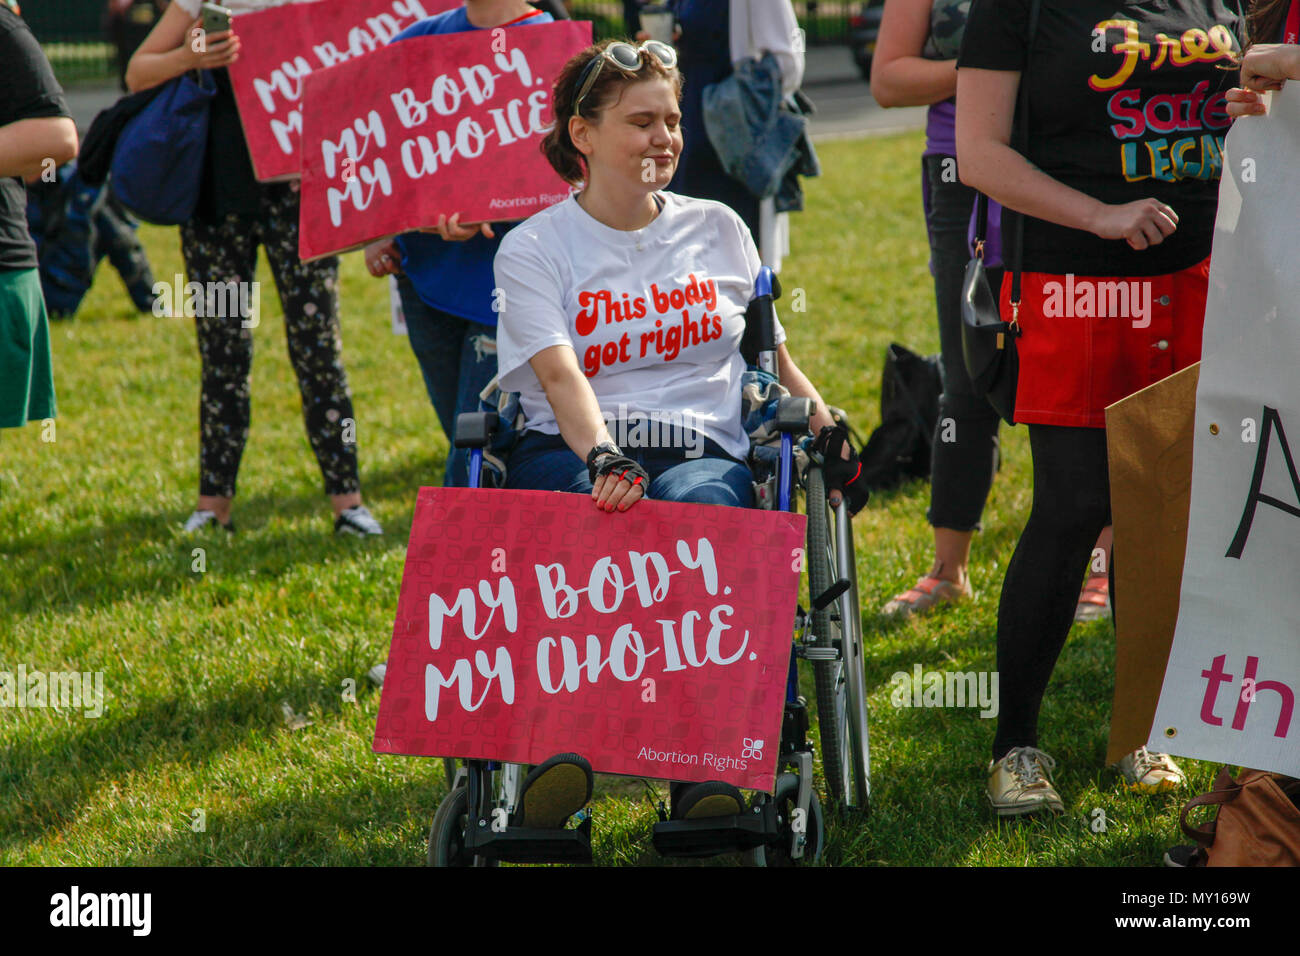 London, UK. 5th June, 2018. Abortion in Northern Ireland Protester Credit: Alex Cavendish/Alamy Live News Stock Photo